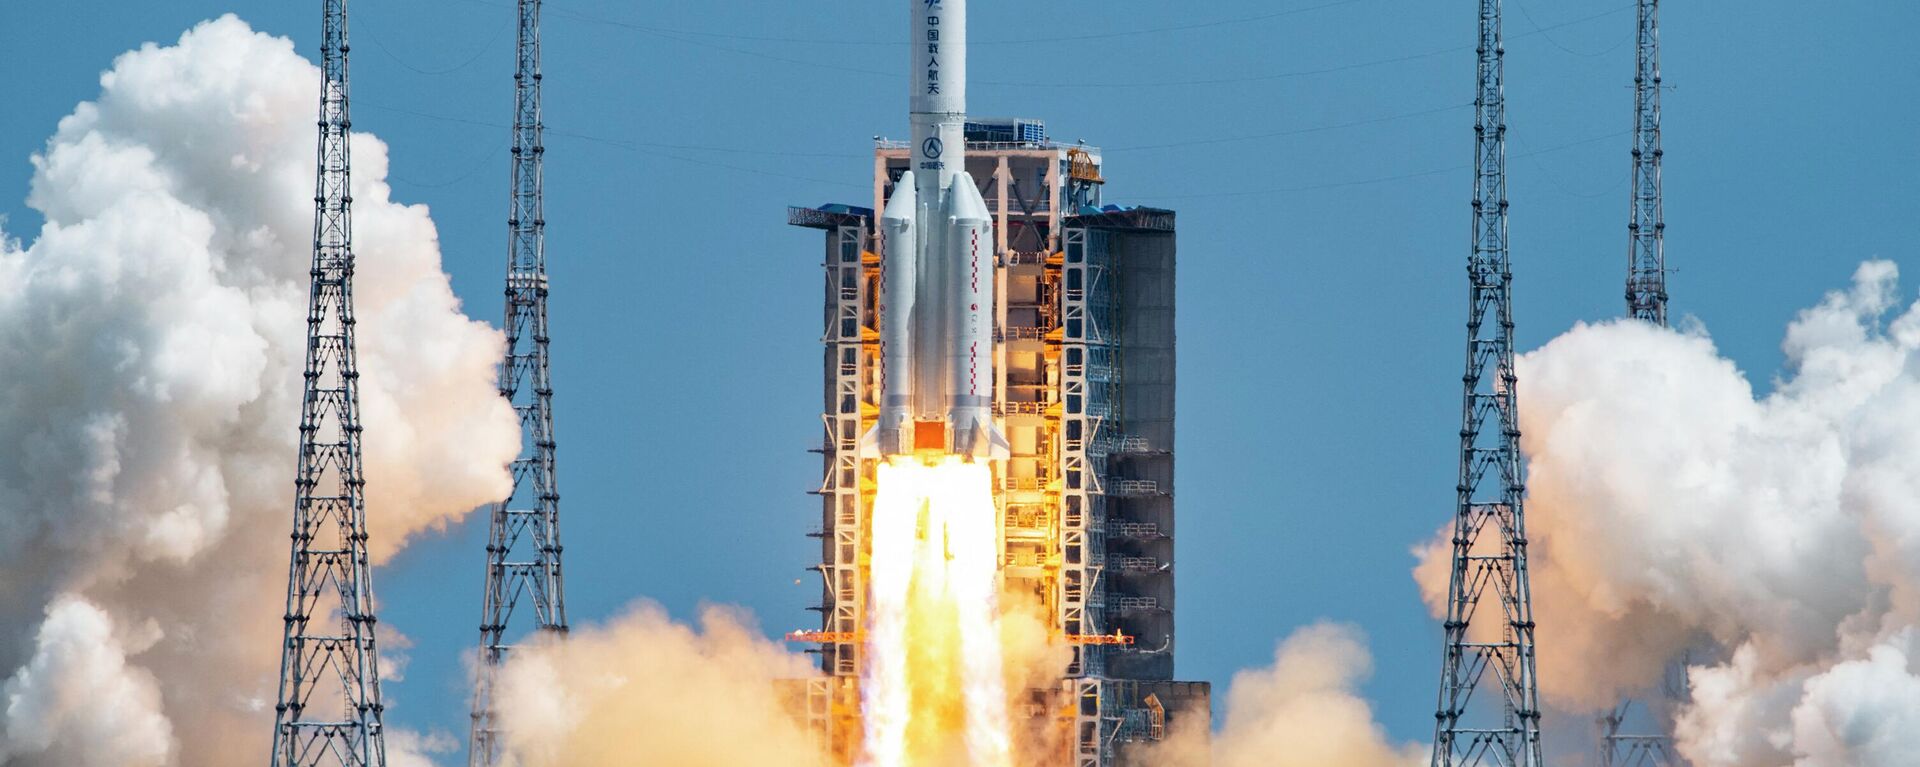 The rocket carrying China’s second module for its Tiangong space station lifts off from Wenchang spaceport in southern China on July 24, 2022. - Sputnik Türkiye, 1920, 29.11.2022